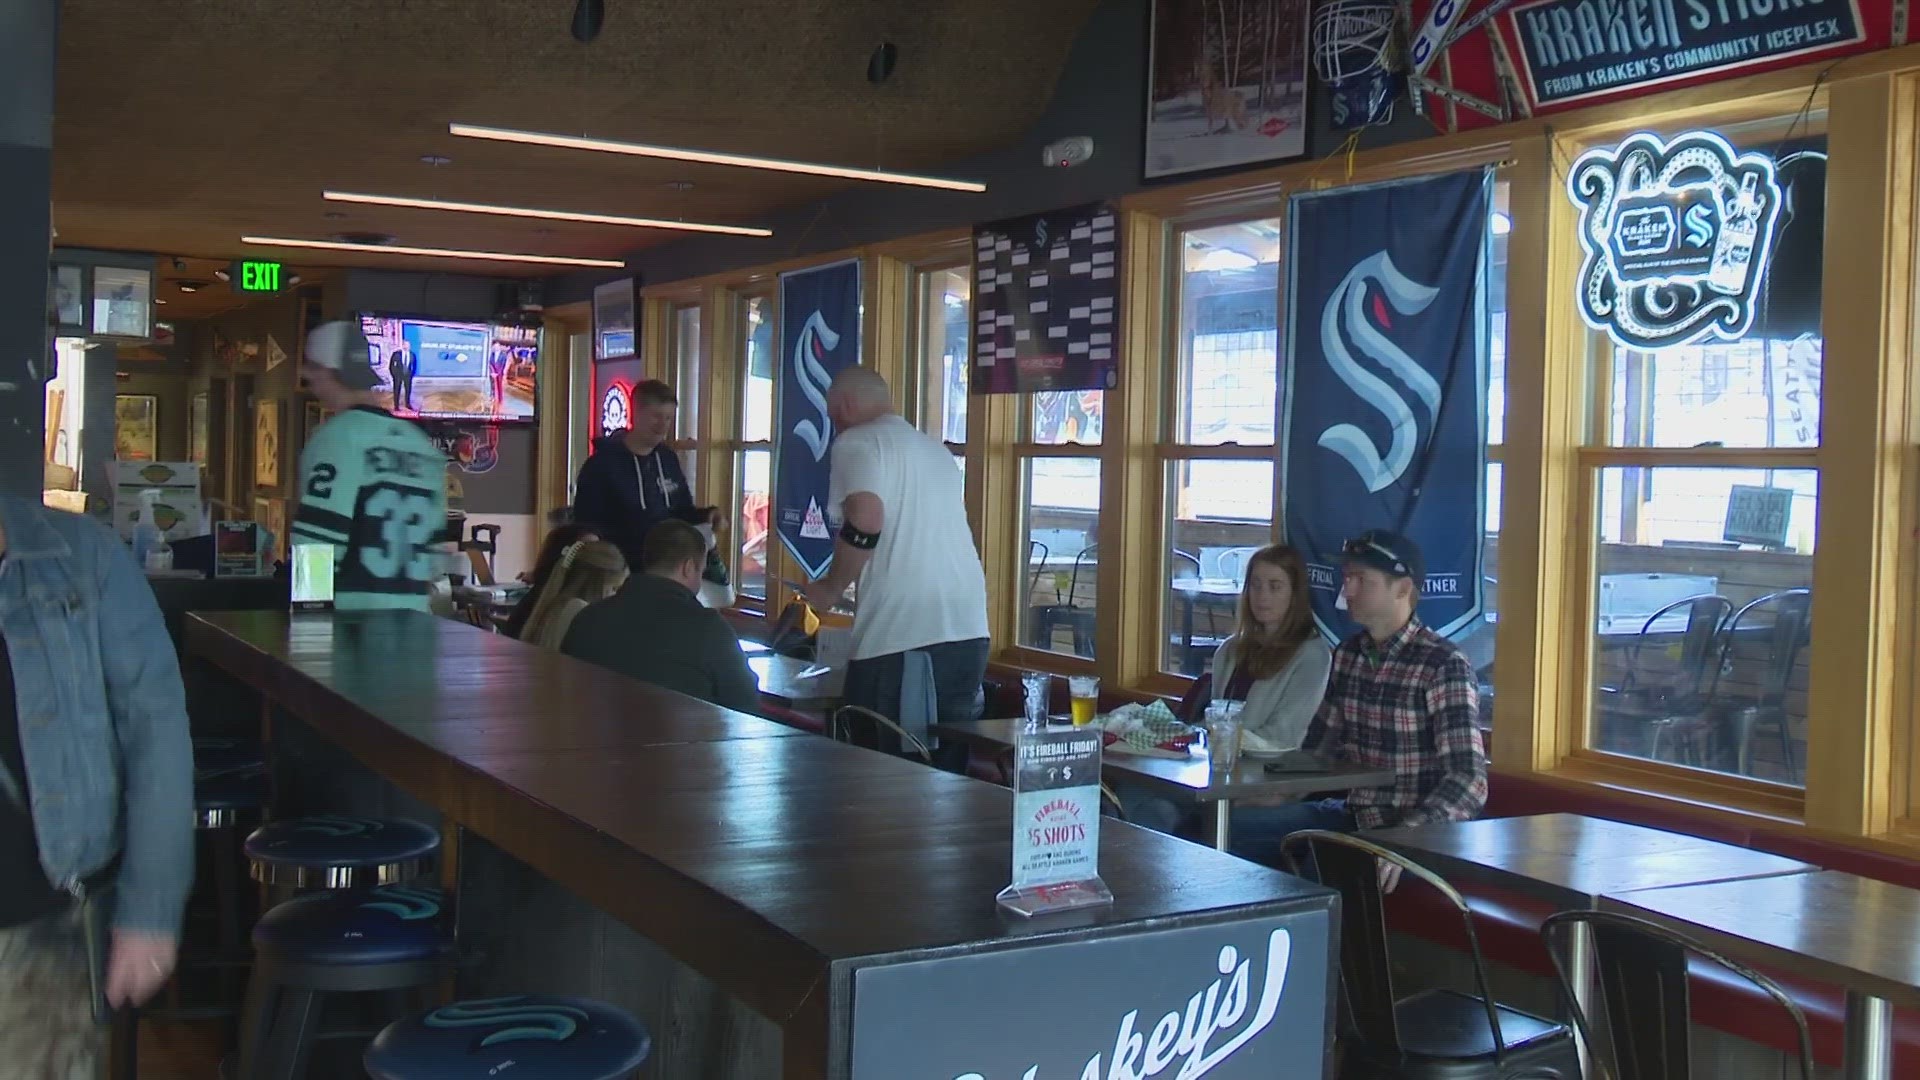 Petosky's has more than doubled beer and food sales during the Kraken's playoff berth.